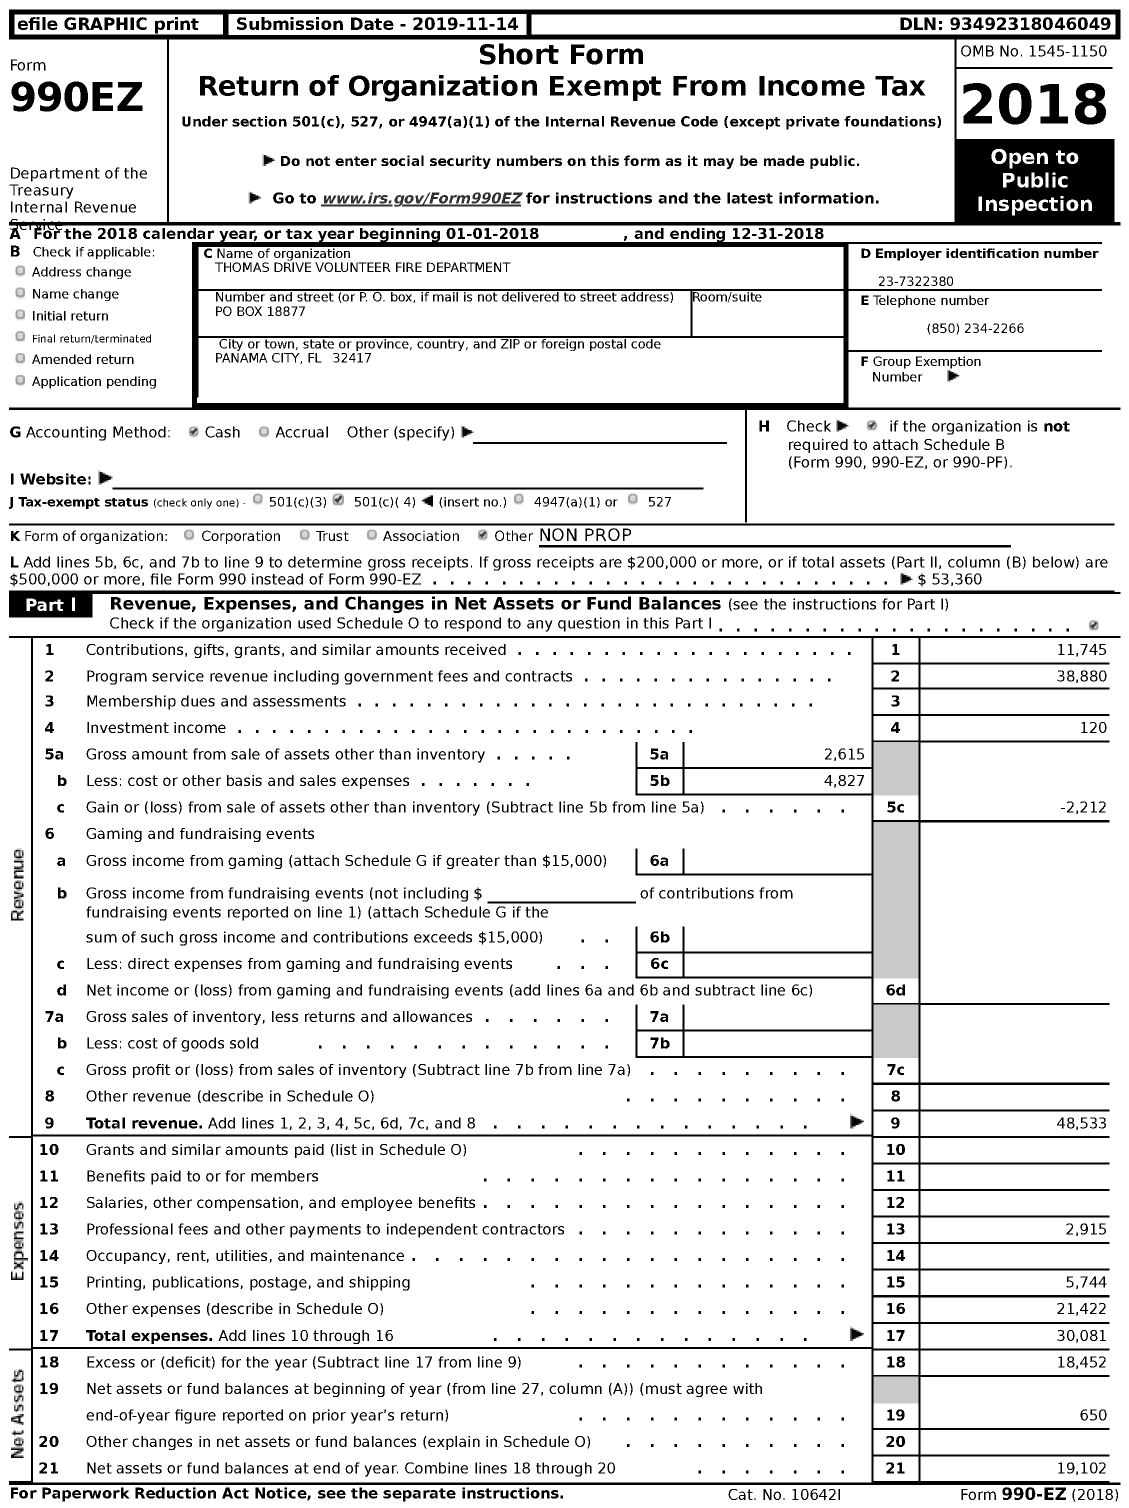 Image of first page of 2018 Form 990EZ for Thomas Drive Volunteer Fire Department